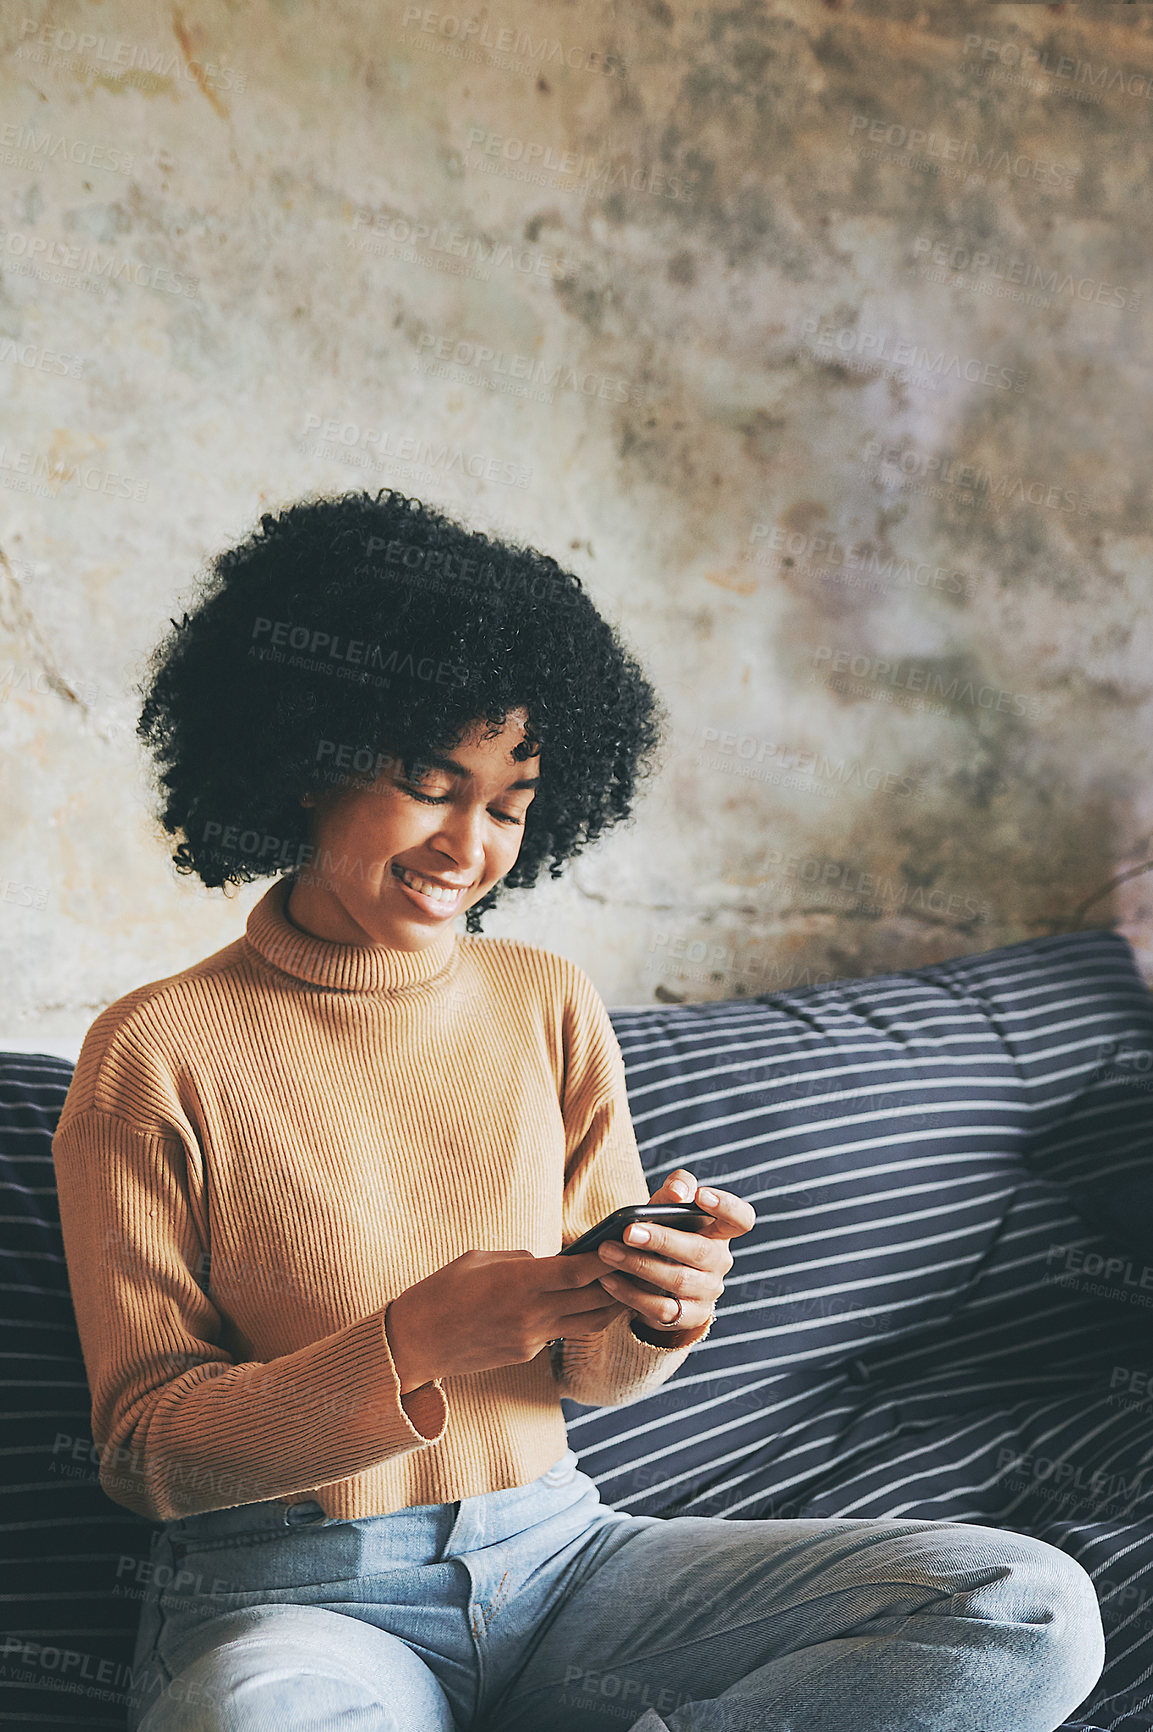 Buy stock photo Shot of a young woman using a cellphone while relaxing on a sofa at home